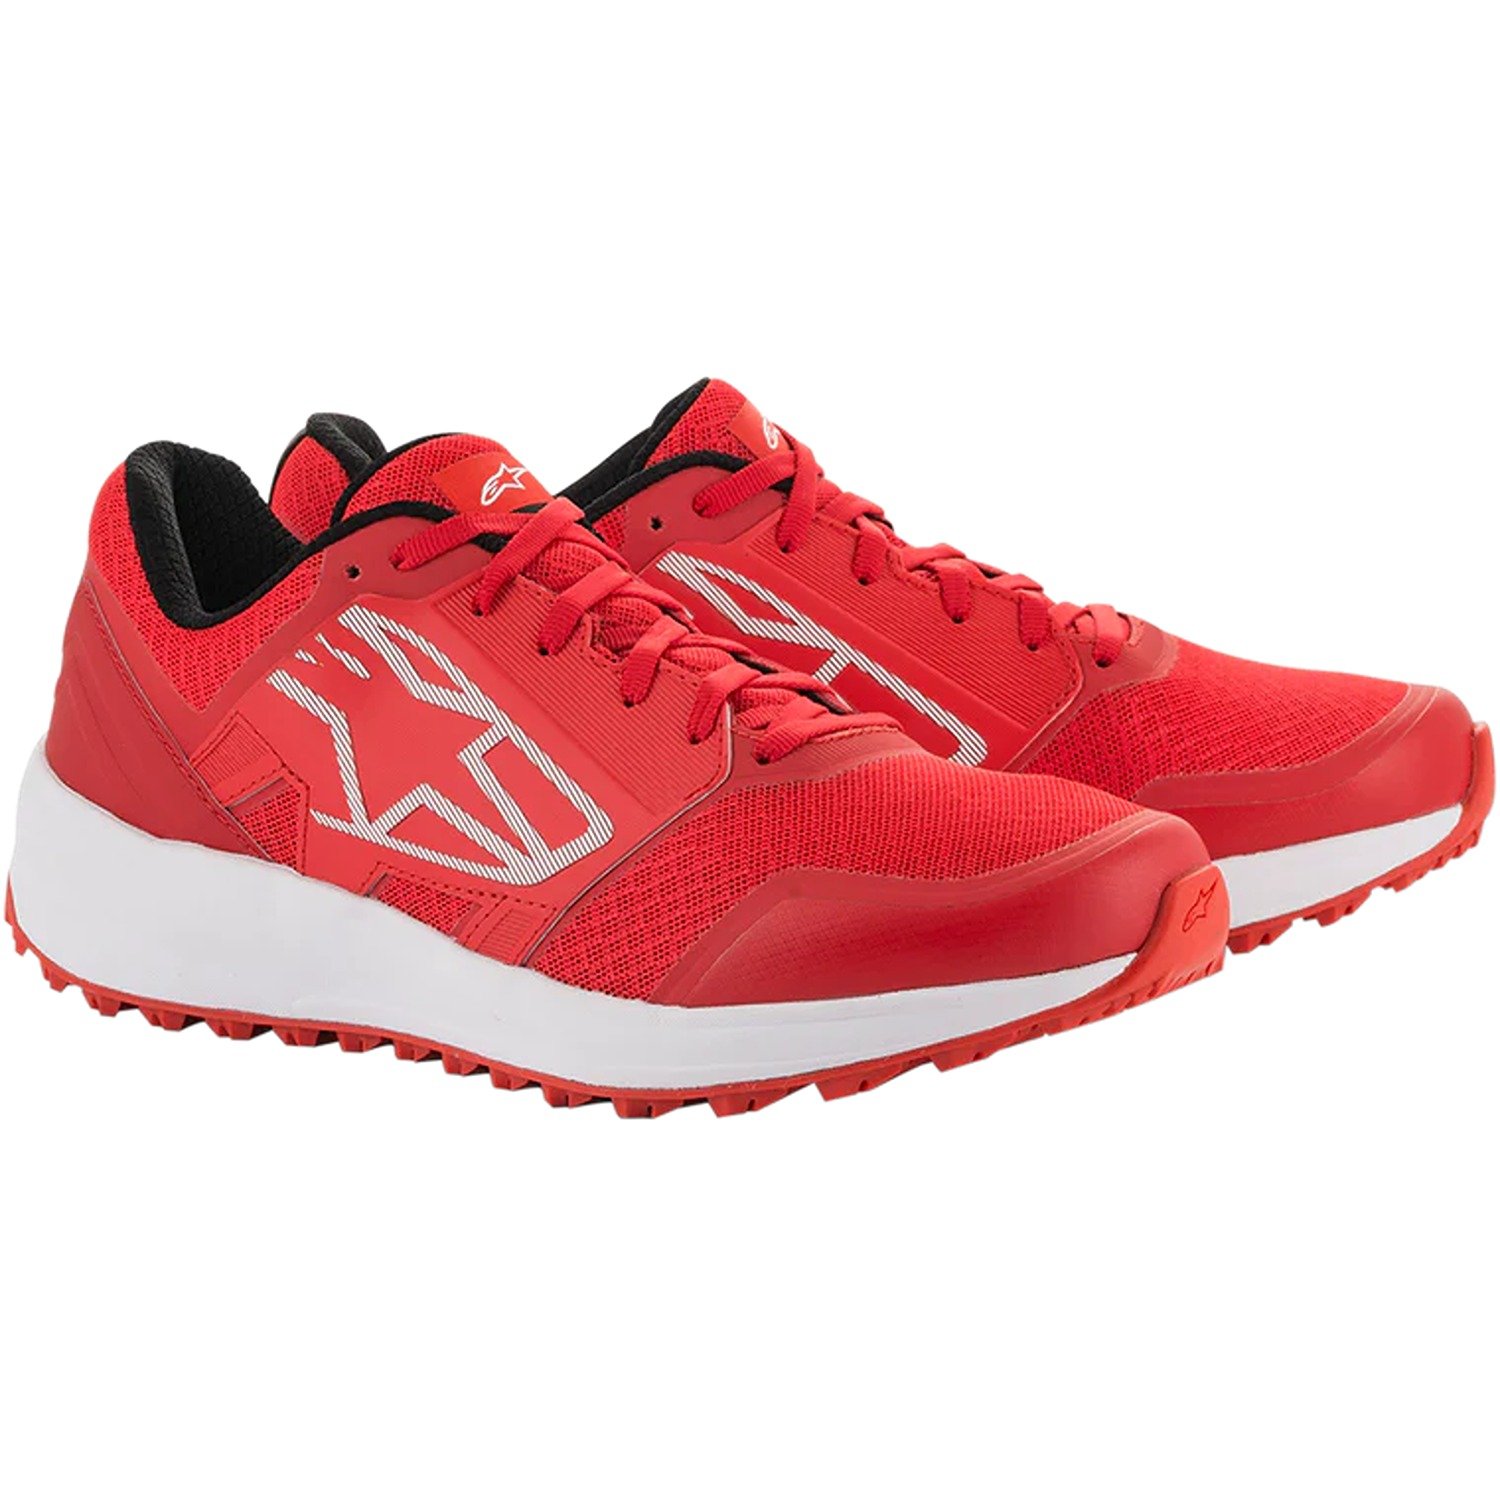 Image of Alpinestars Meta Trail Shoes Red White Size US 85 ID 8059175092107